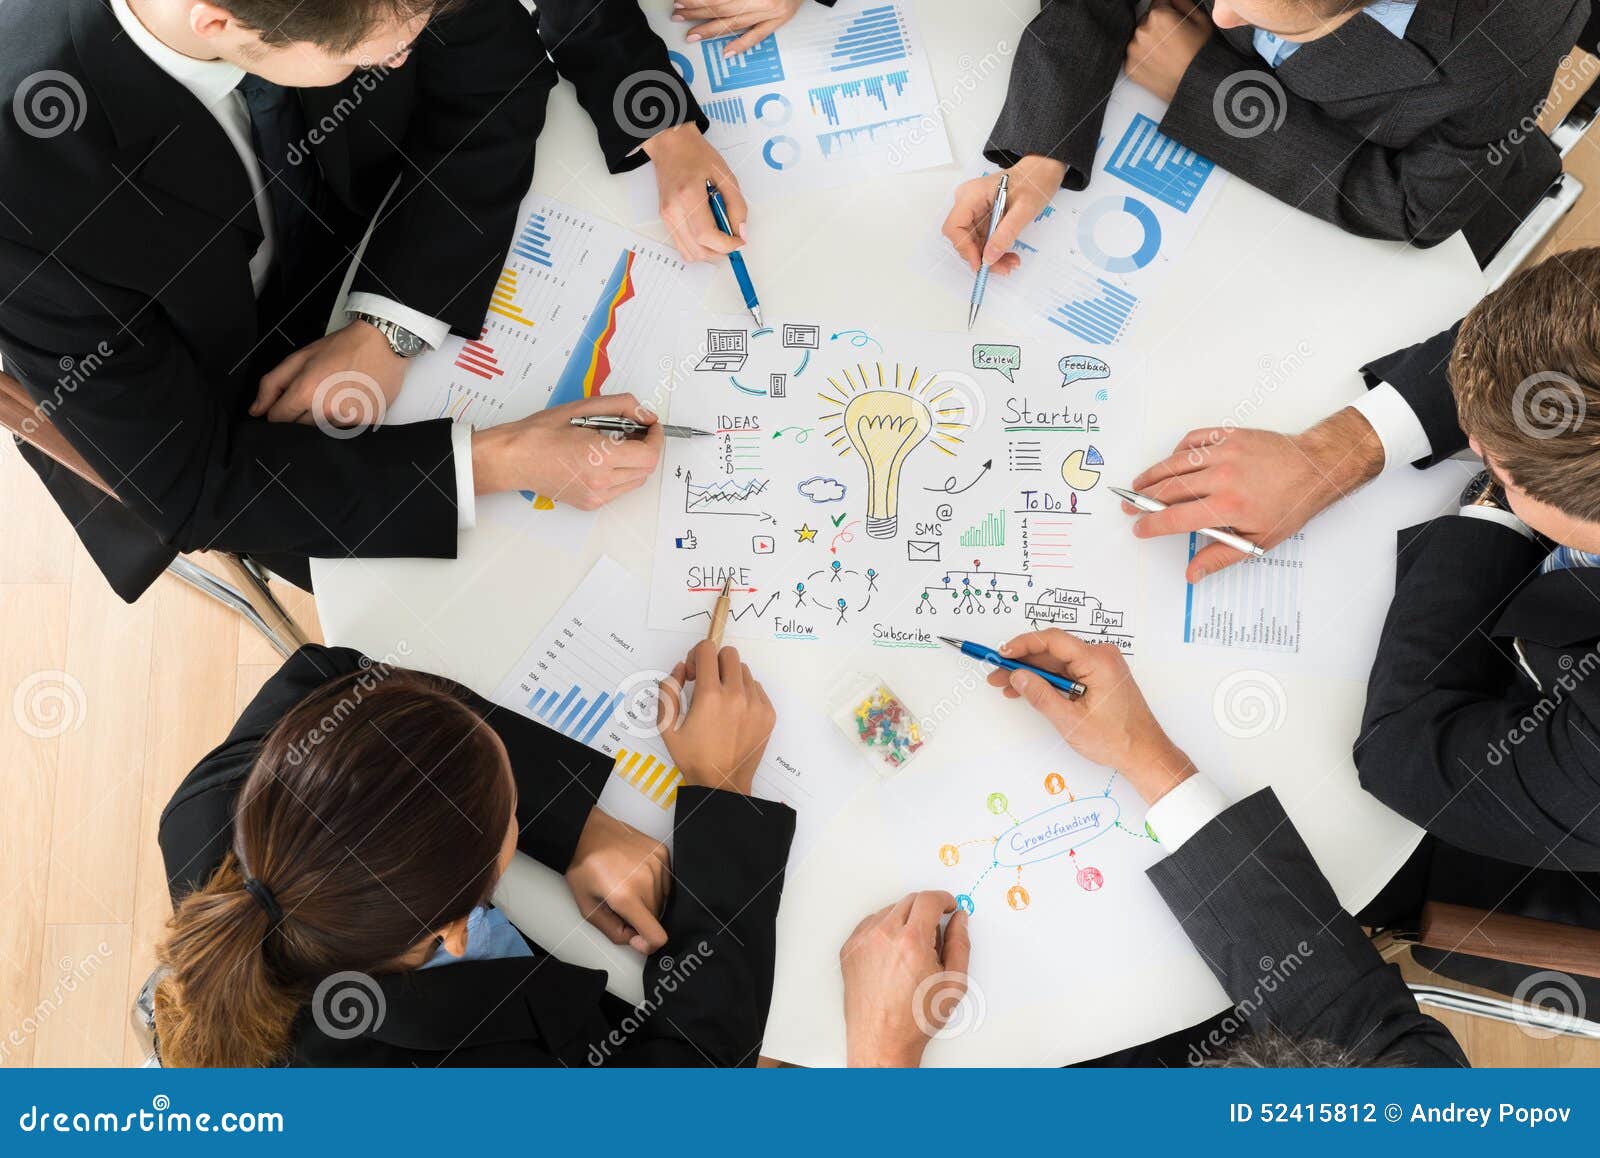 group of businesspeople planning for startup